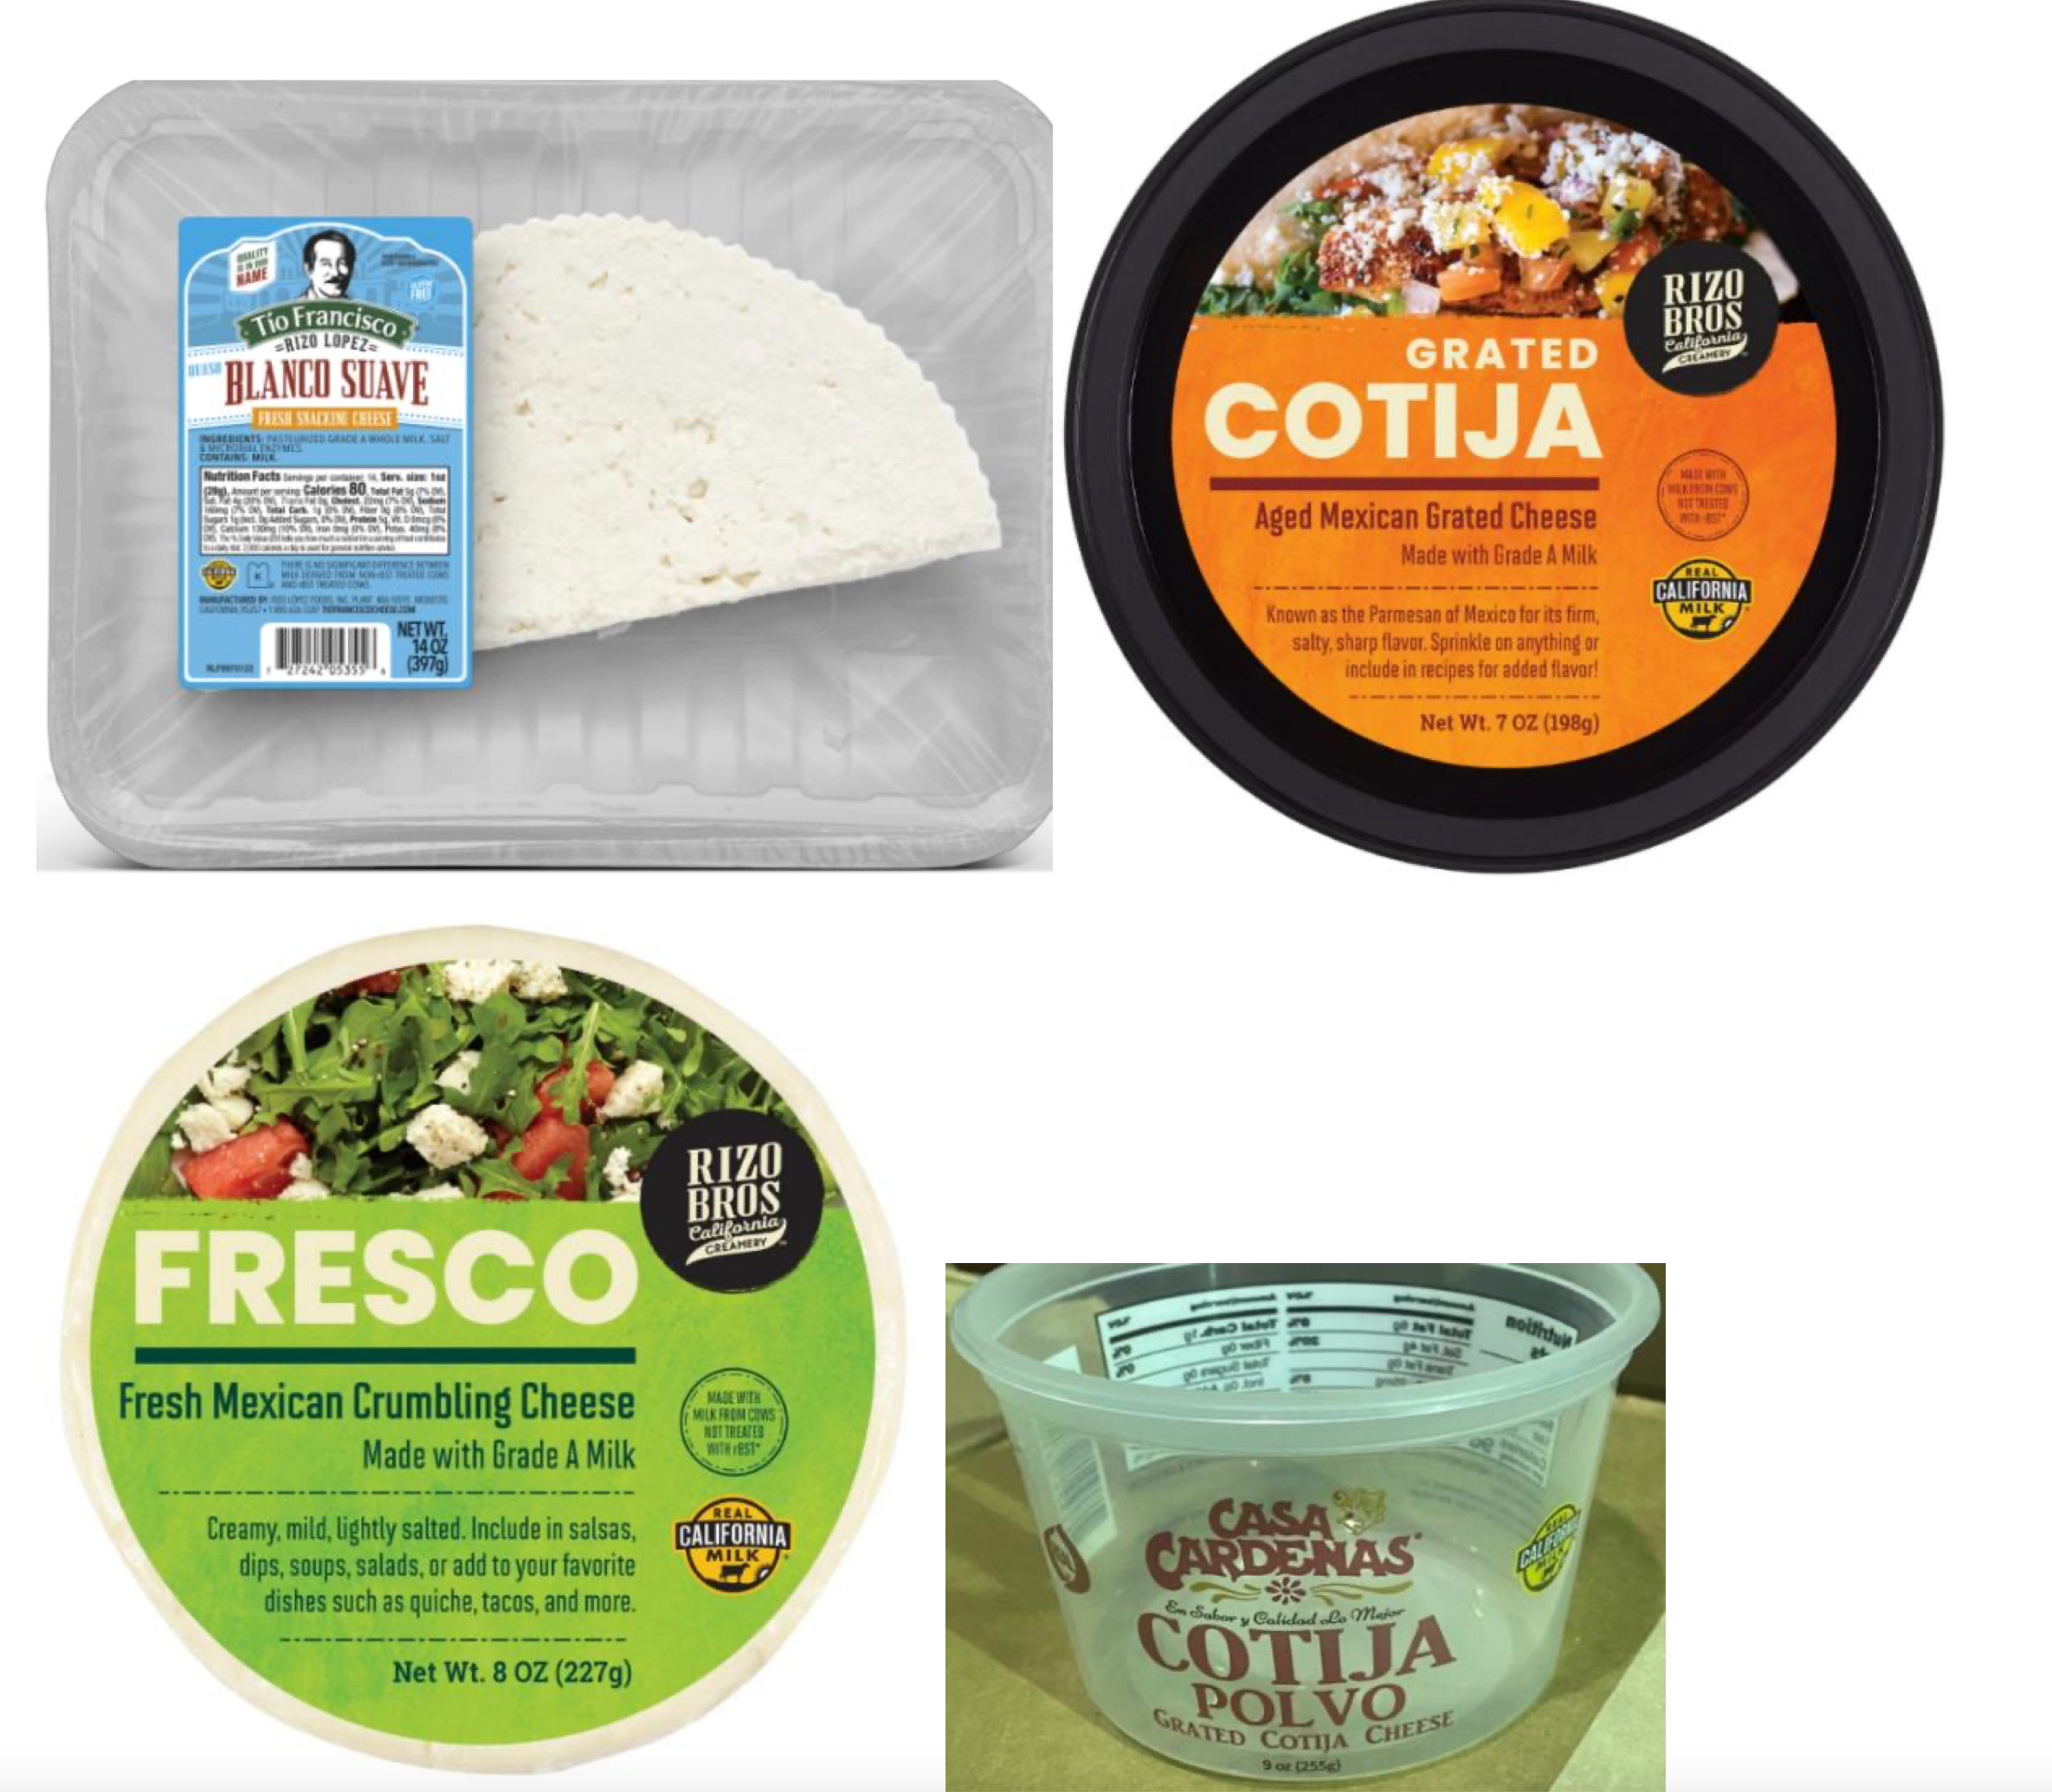 costco, trader joe's pull some products with cheese in expanded recall for listeria risk